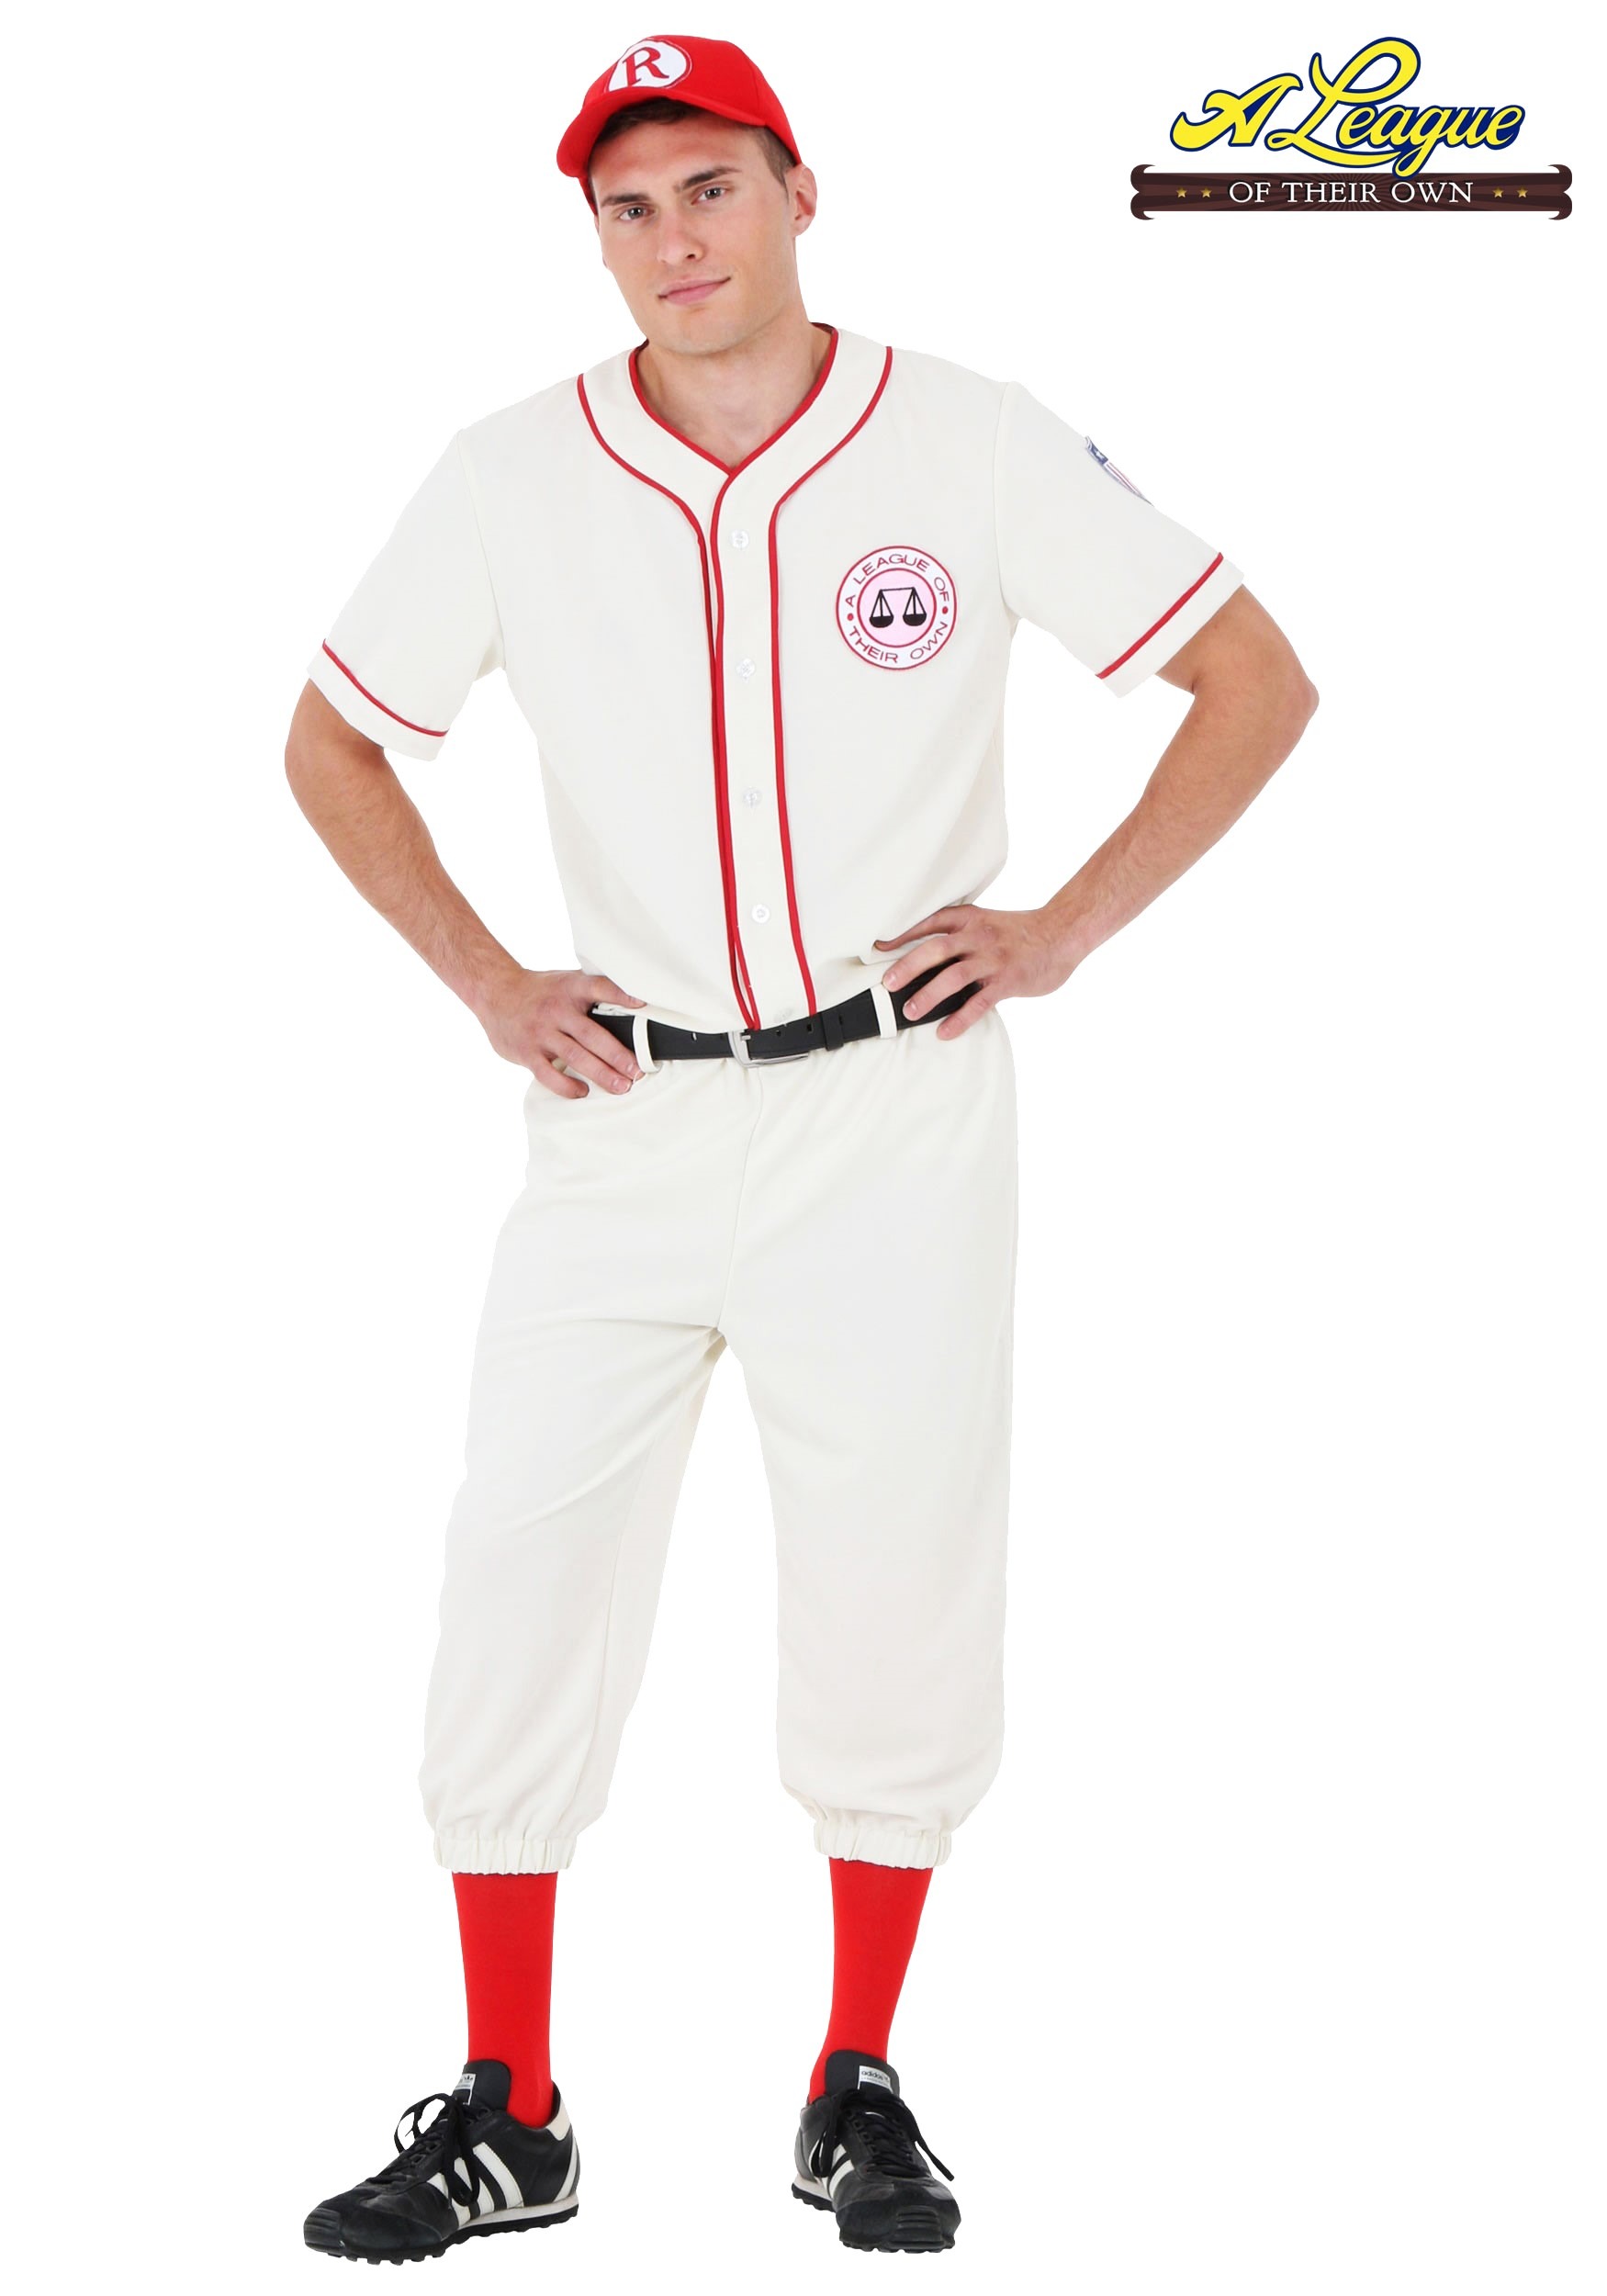 A League of Their Own Coach Jimmy Costume